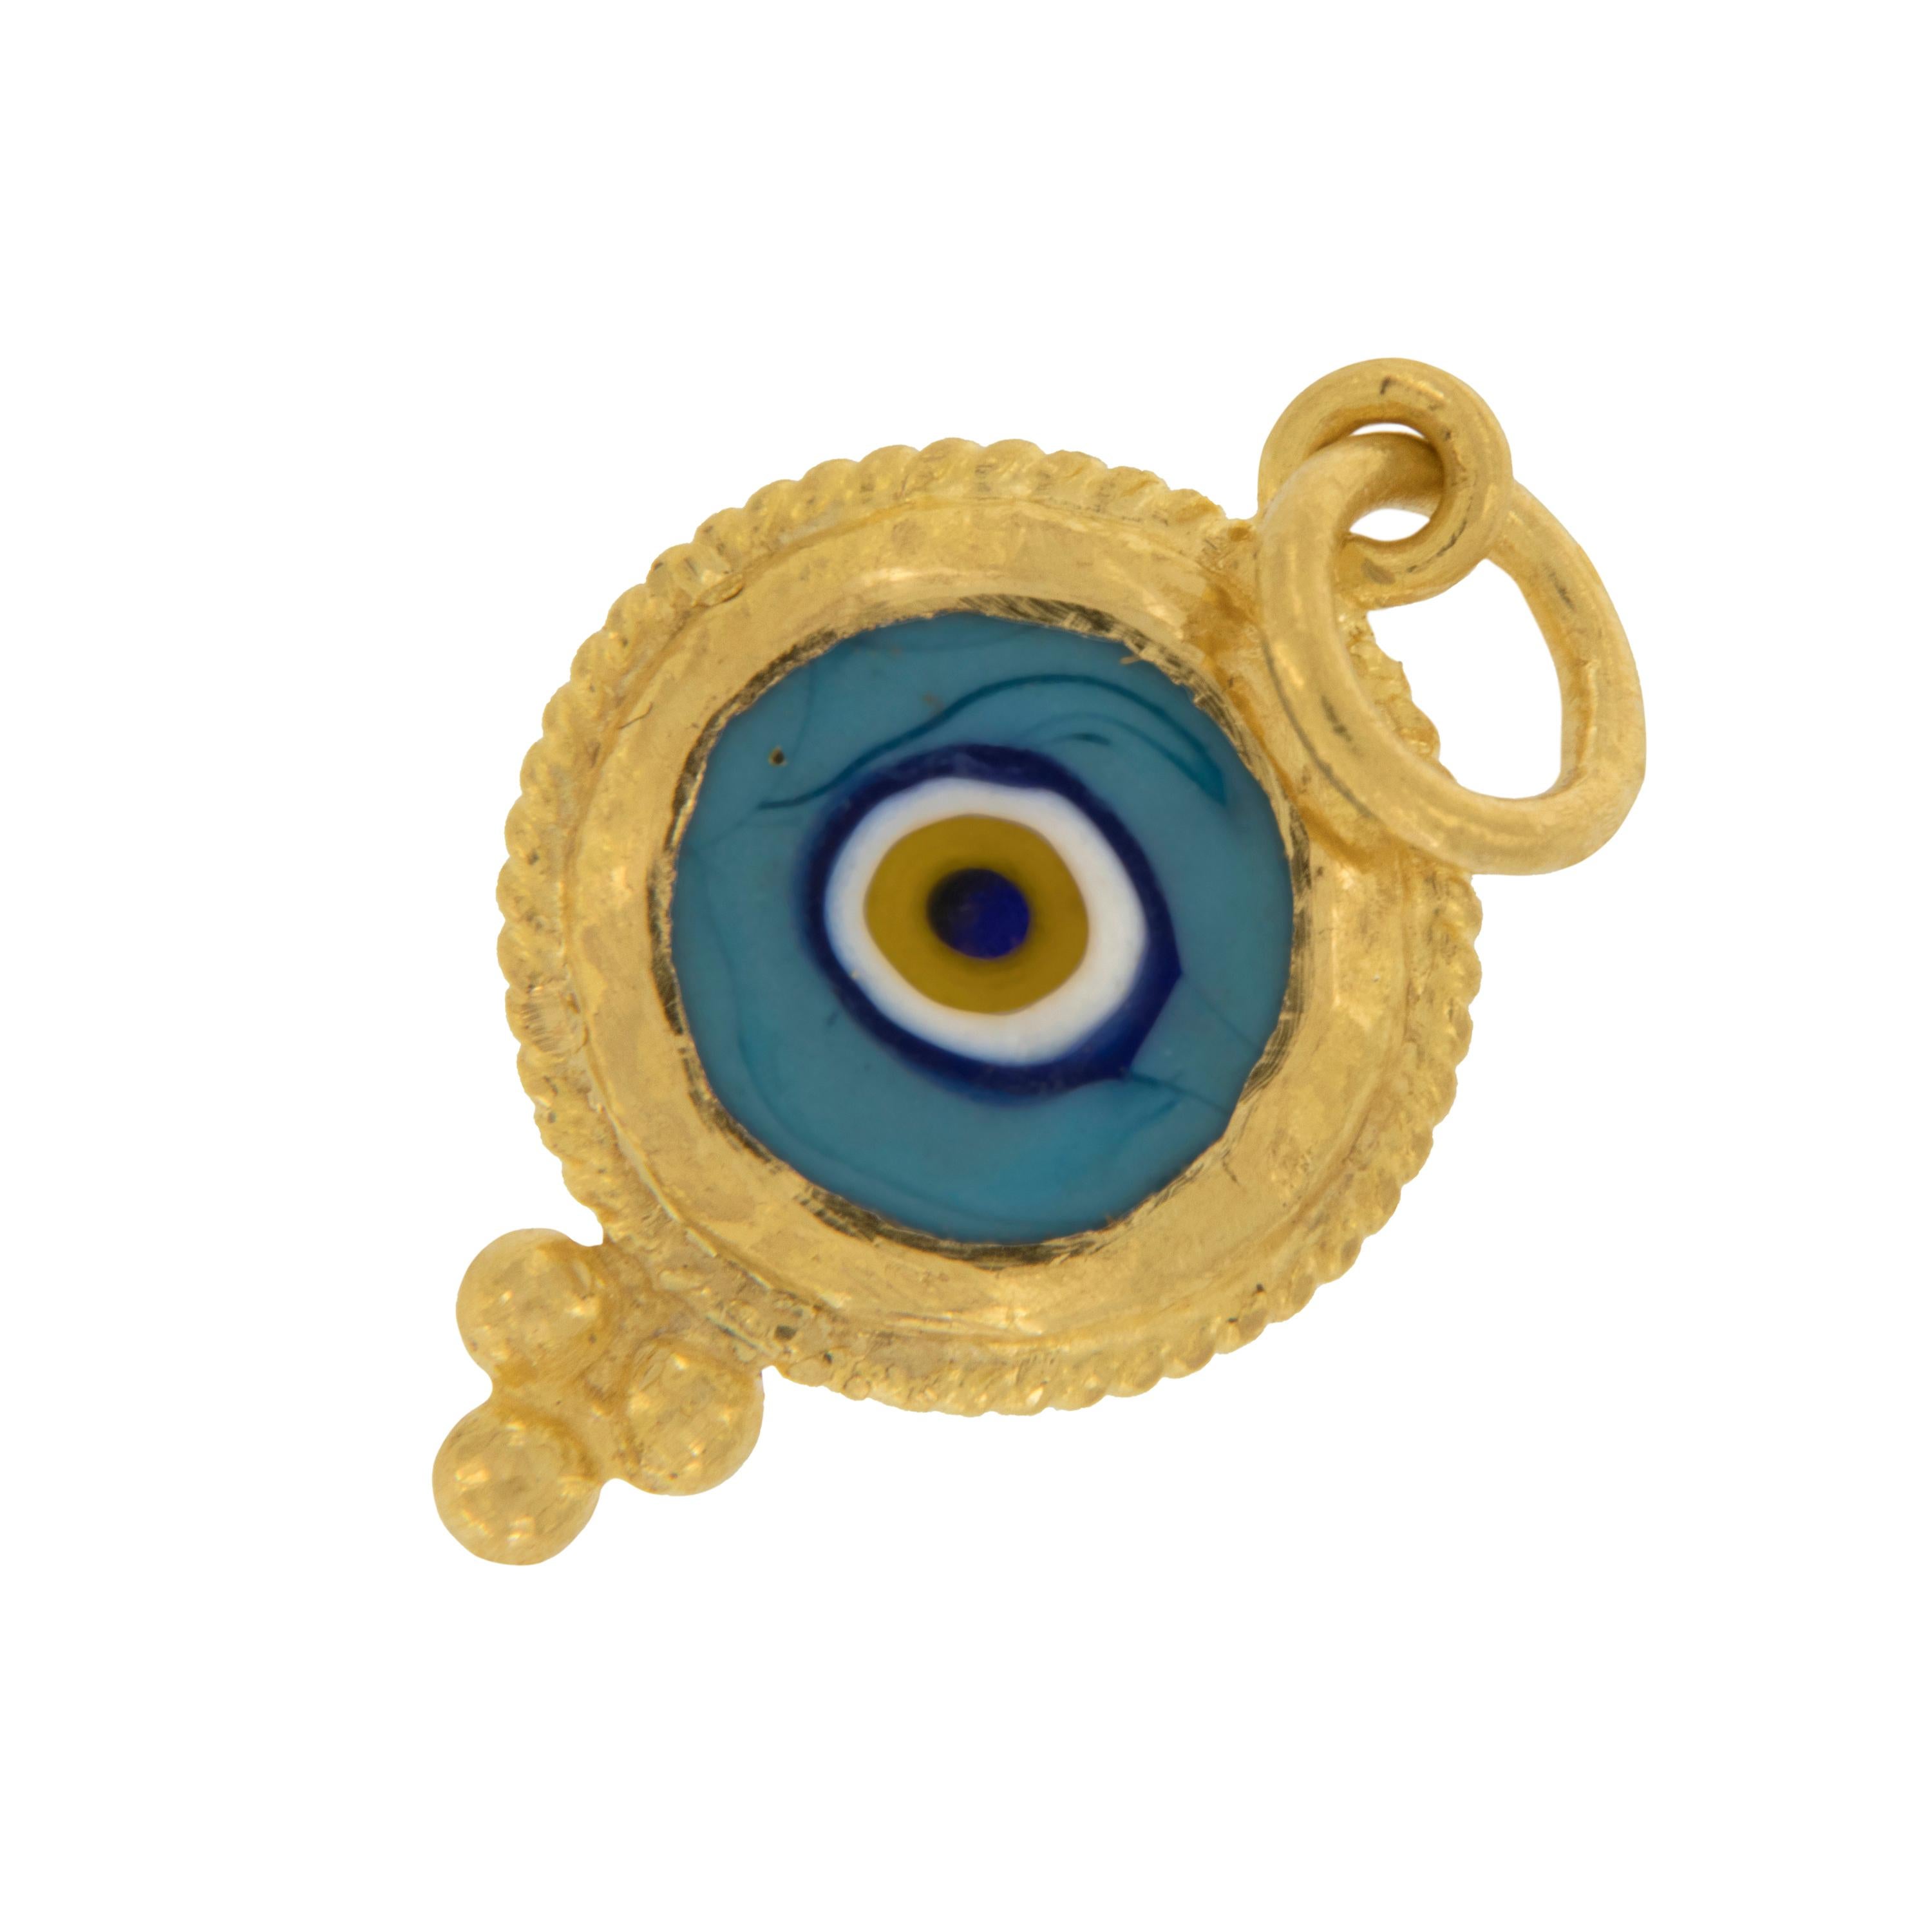 Rarest of all the golds, 24 karat gold is valued by all discerning investors. With it's unmistakable warm yellow color & hammered finish, this evil eye pendant / charm talisman is thought to keep you safe from curses. Light Blue: Color of the sky –